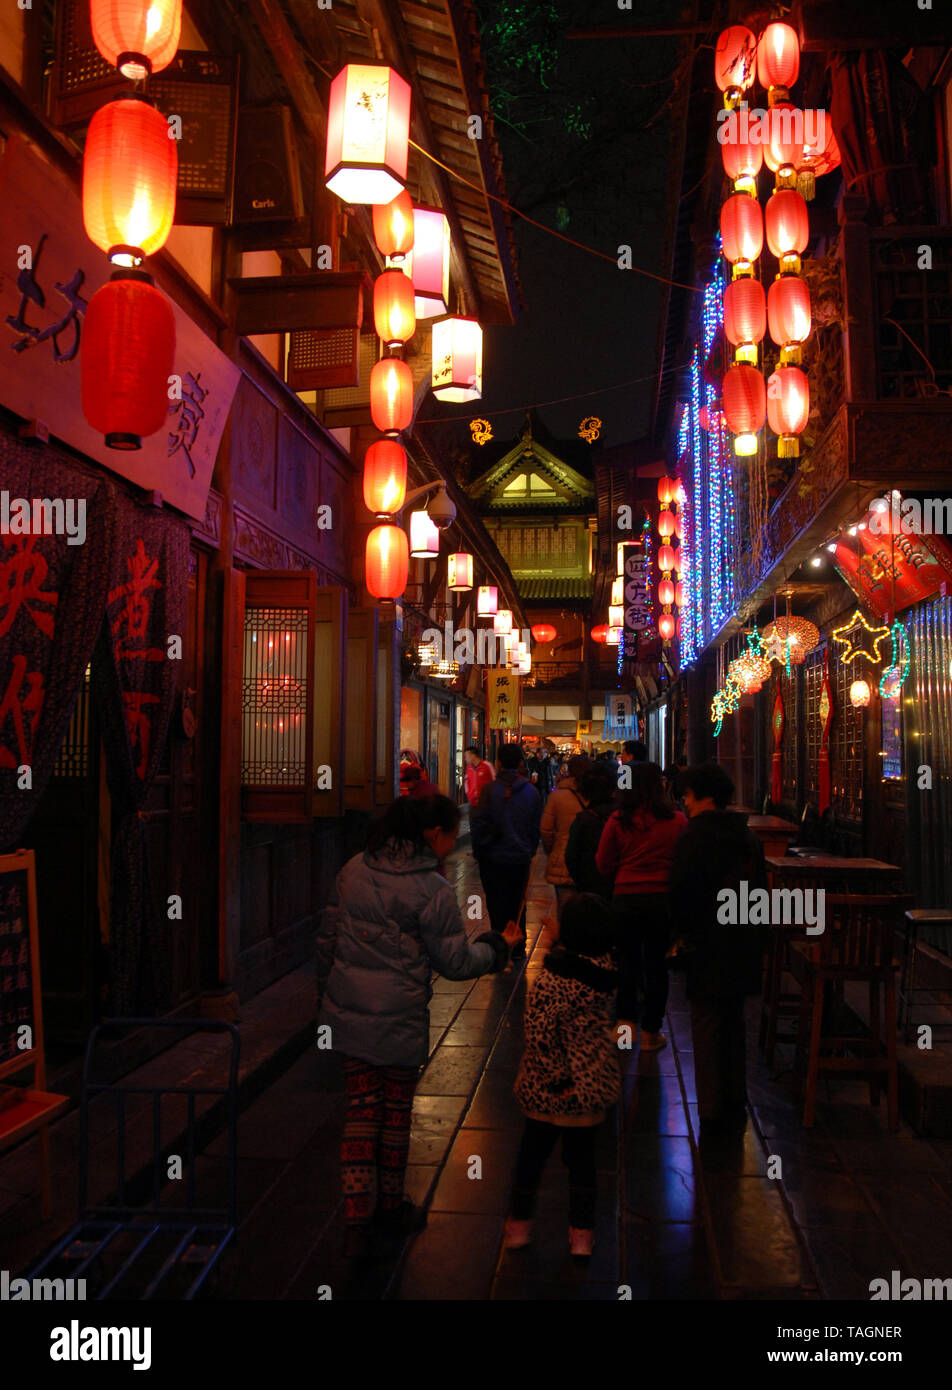 Jinli Ancient Street in Chengdu, China.  Jinli Street has cafes and bars and is decorated with red lanterns. It's a fun place at night in Chengdu. Stock Photo